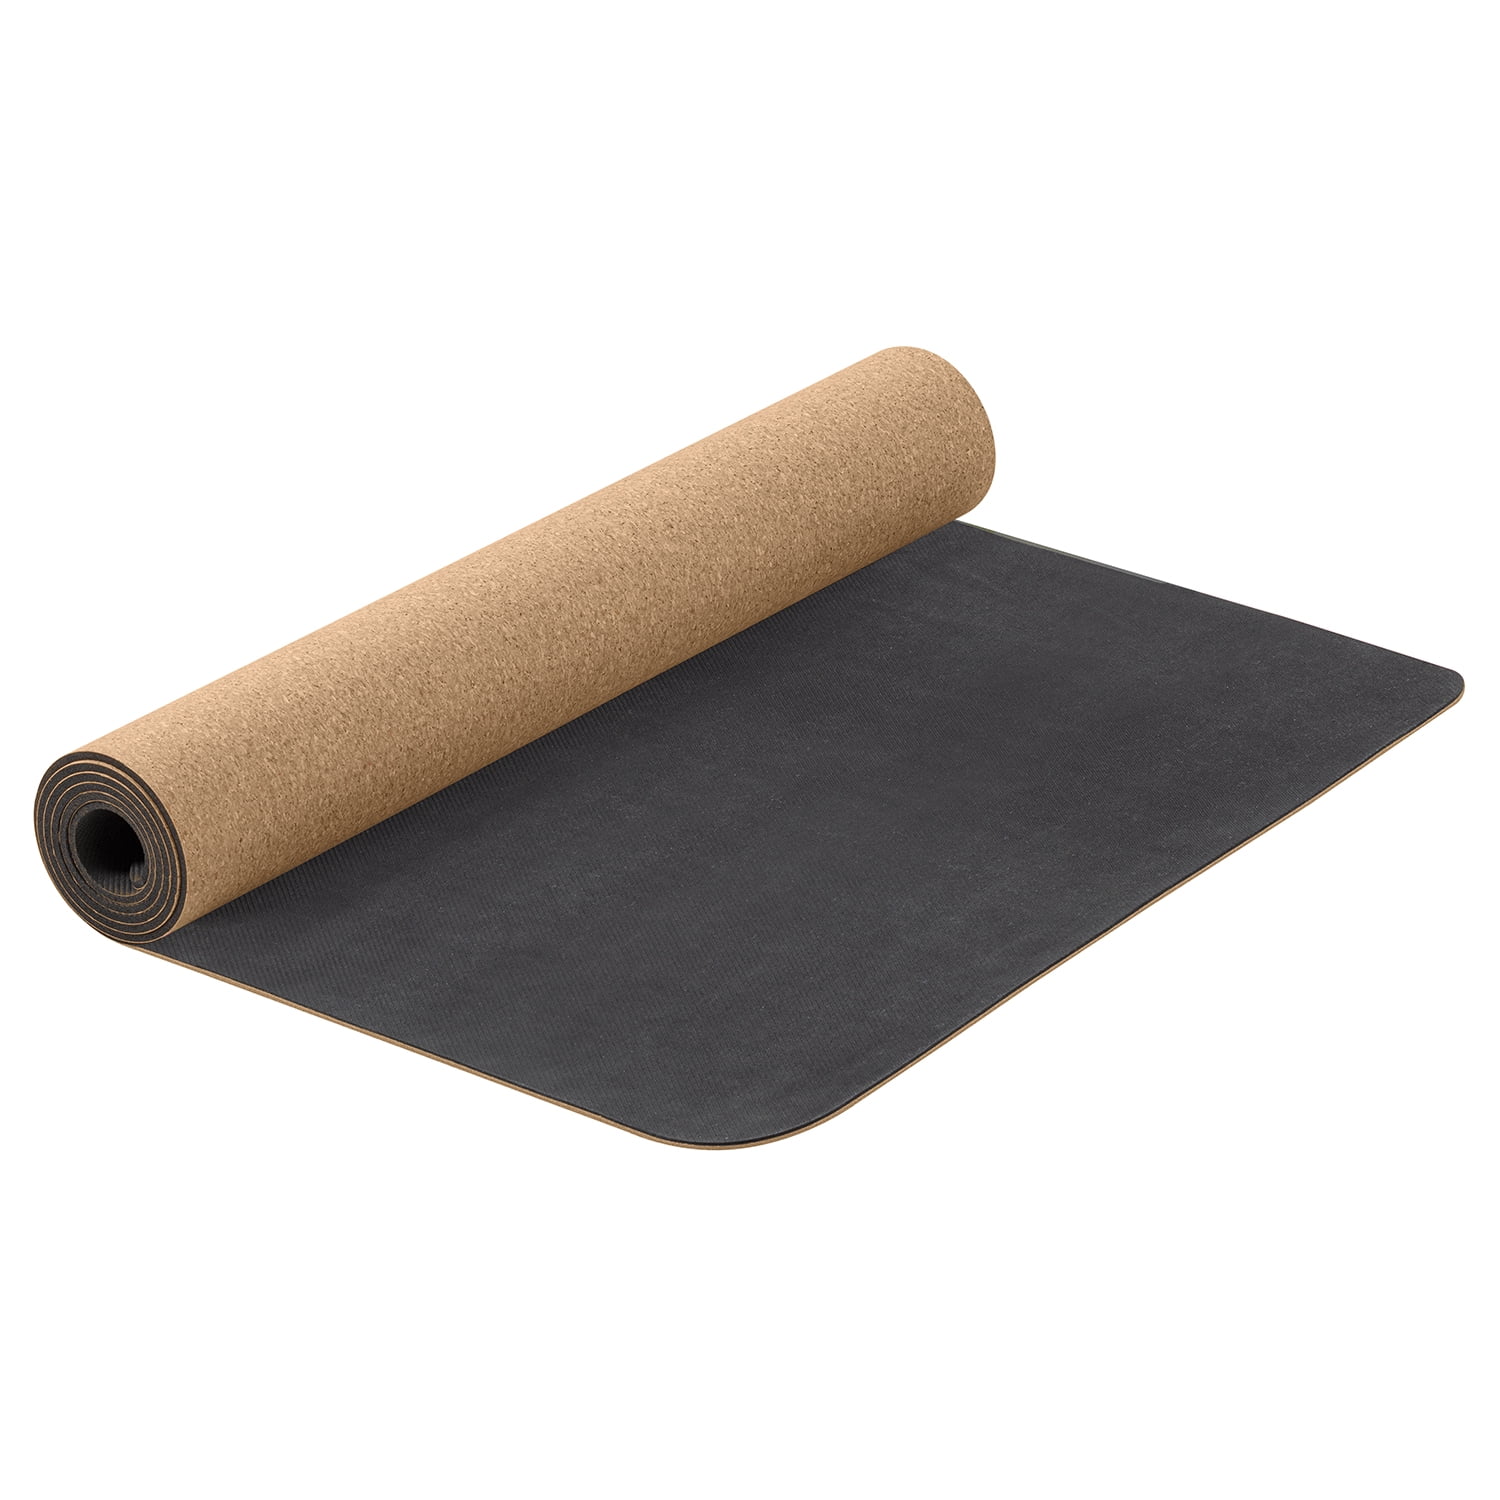 AIREX Exercise ECO Mat Fitness for Yoga, Physical Therapy